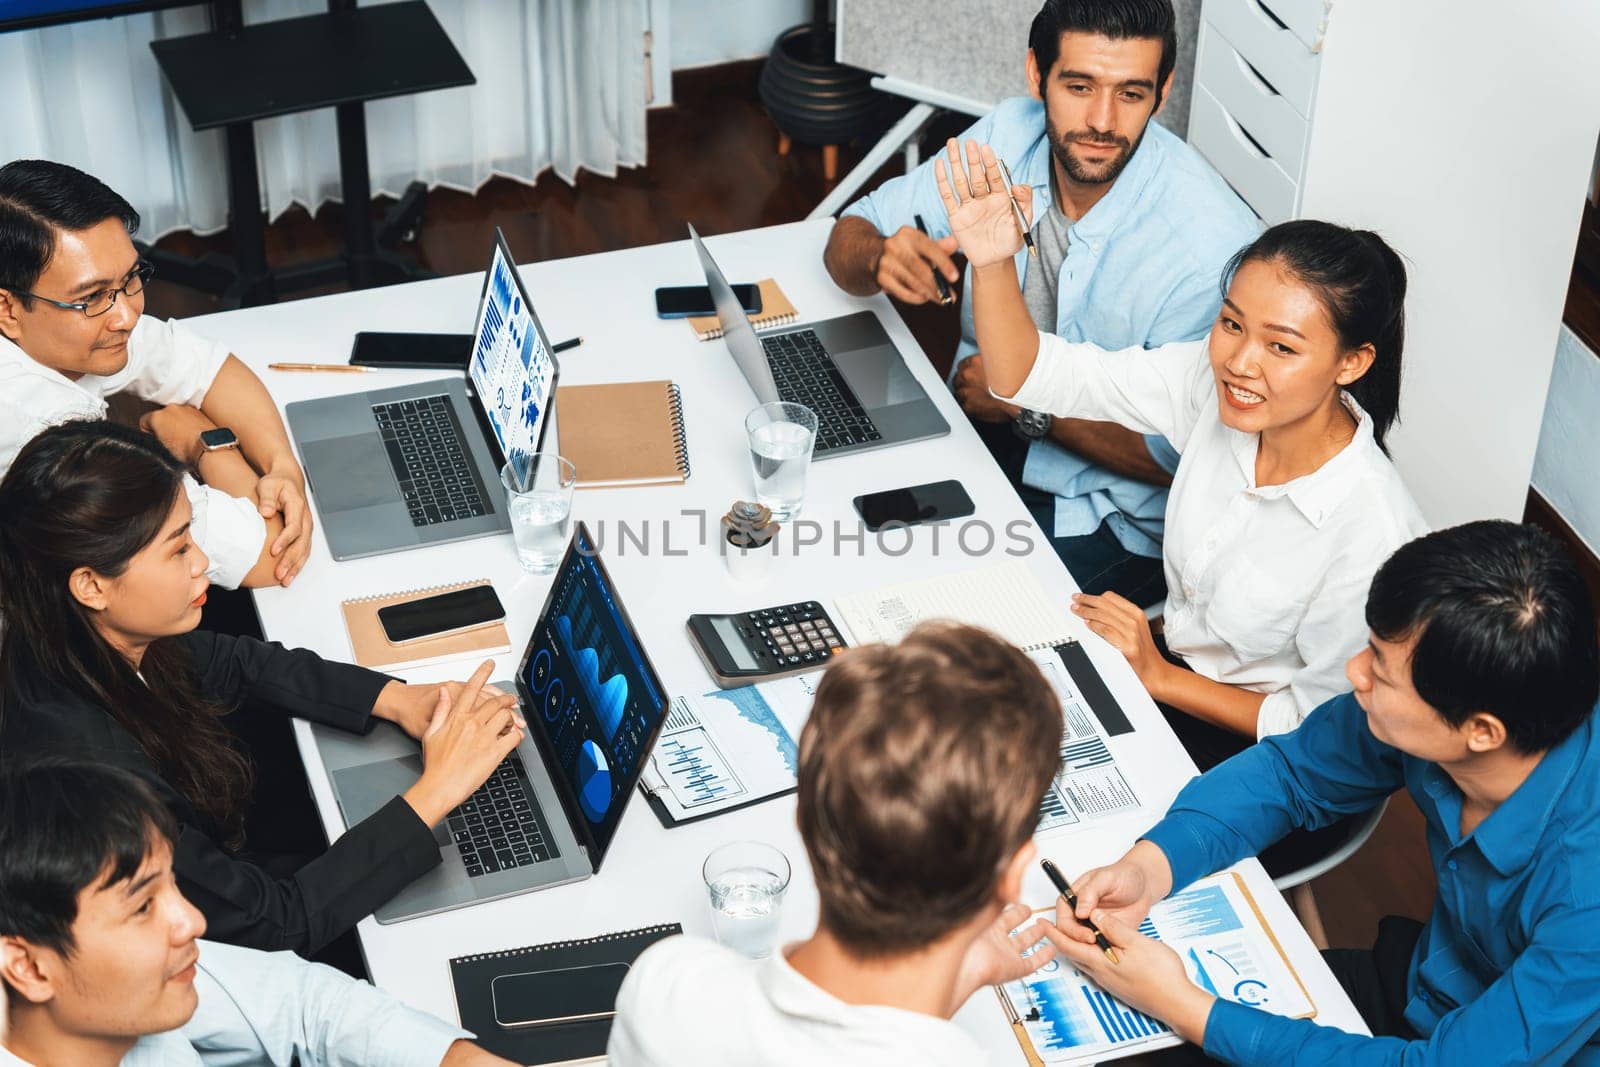 Office worker raise hand up asking for question during business meeting on data analysis using BI or business intelligence software for marketing and strategic planning. Prudent